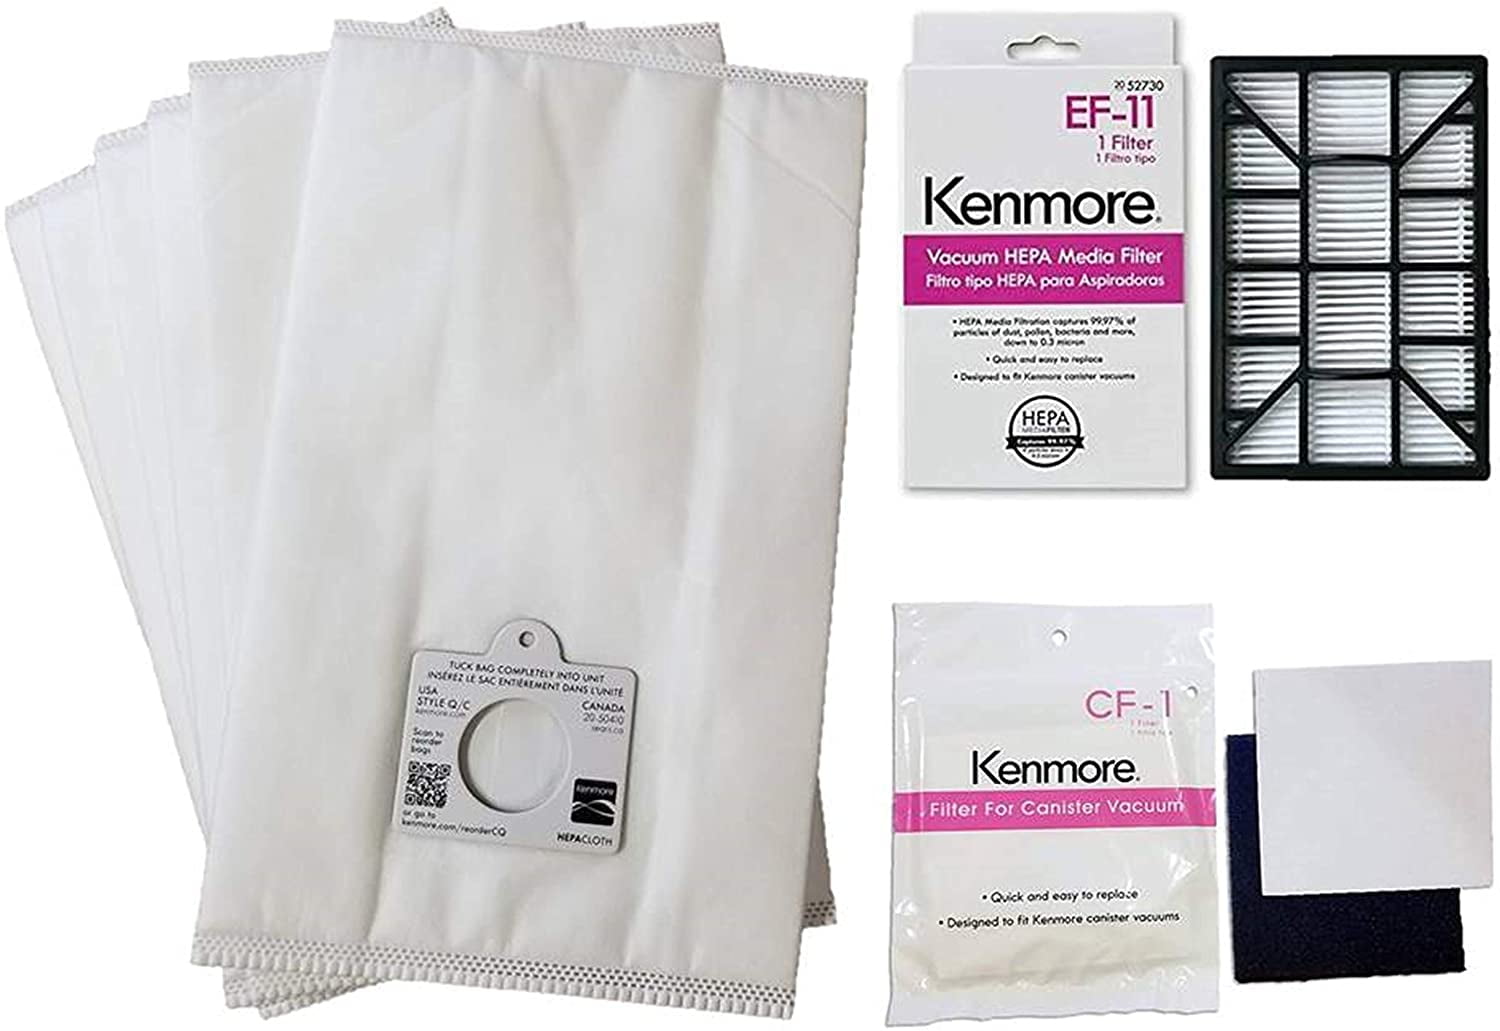 NEW Lot Of 4 Kenmore 6-Packs Canister Vacuum Bags 53292 Q/C HEPA FILTRATION 